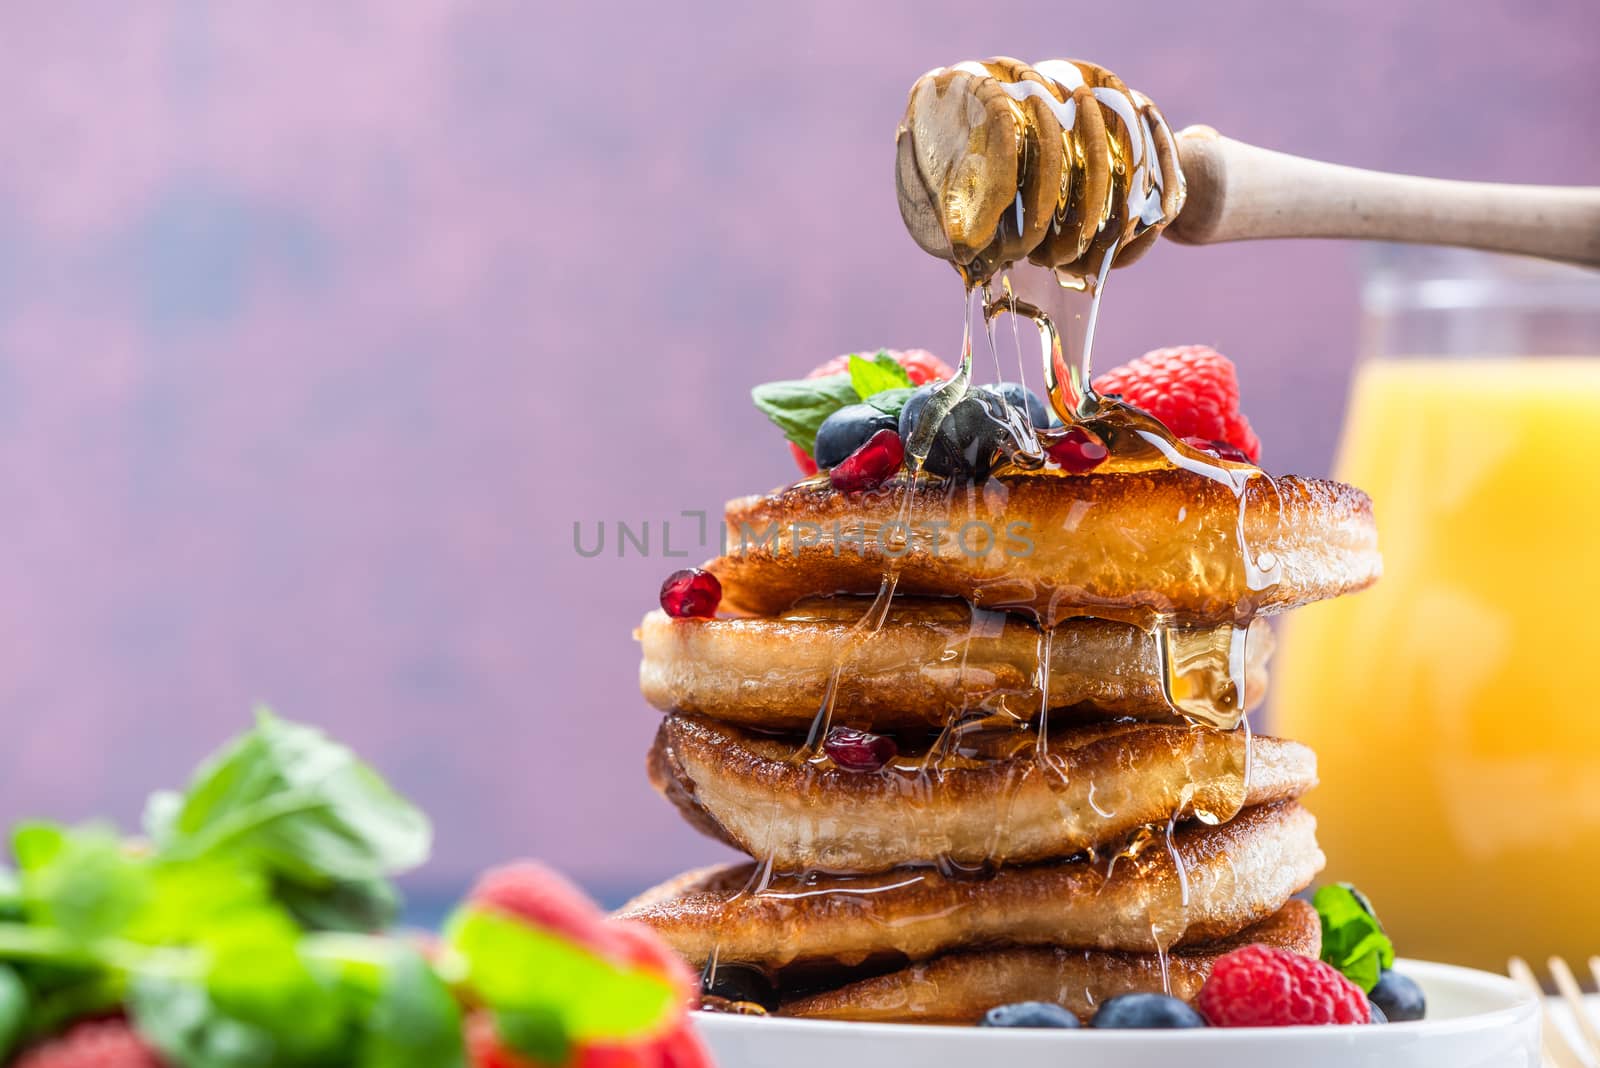 Pouring Honey on Pancakes Stack Topped with fresh Fruits. Shrove by merc67